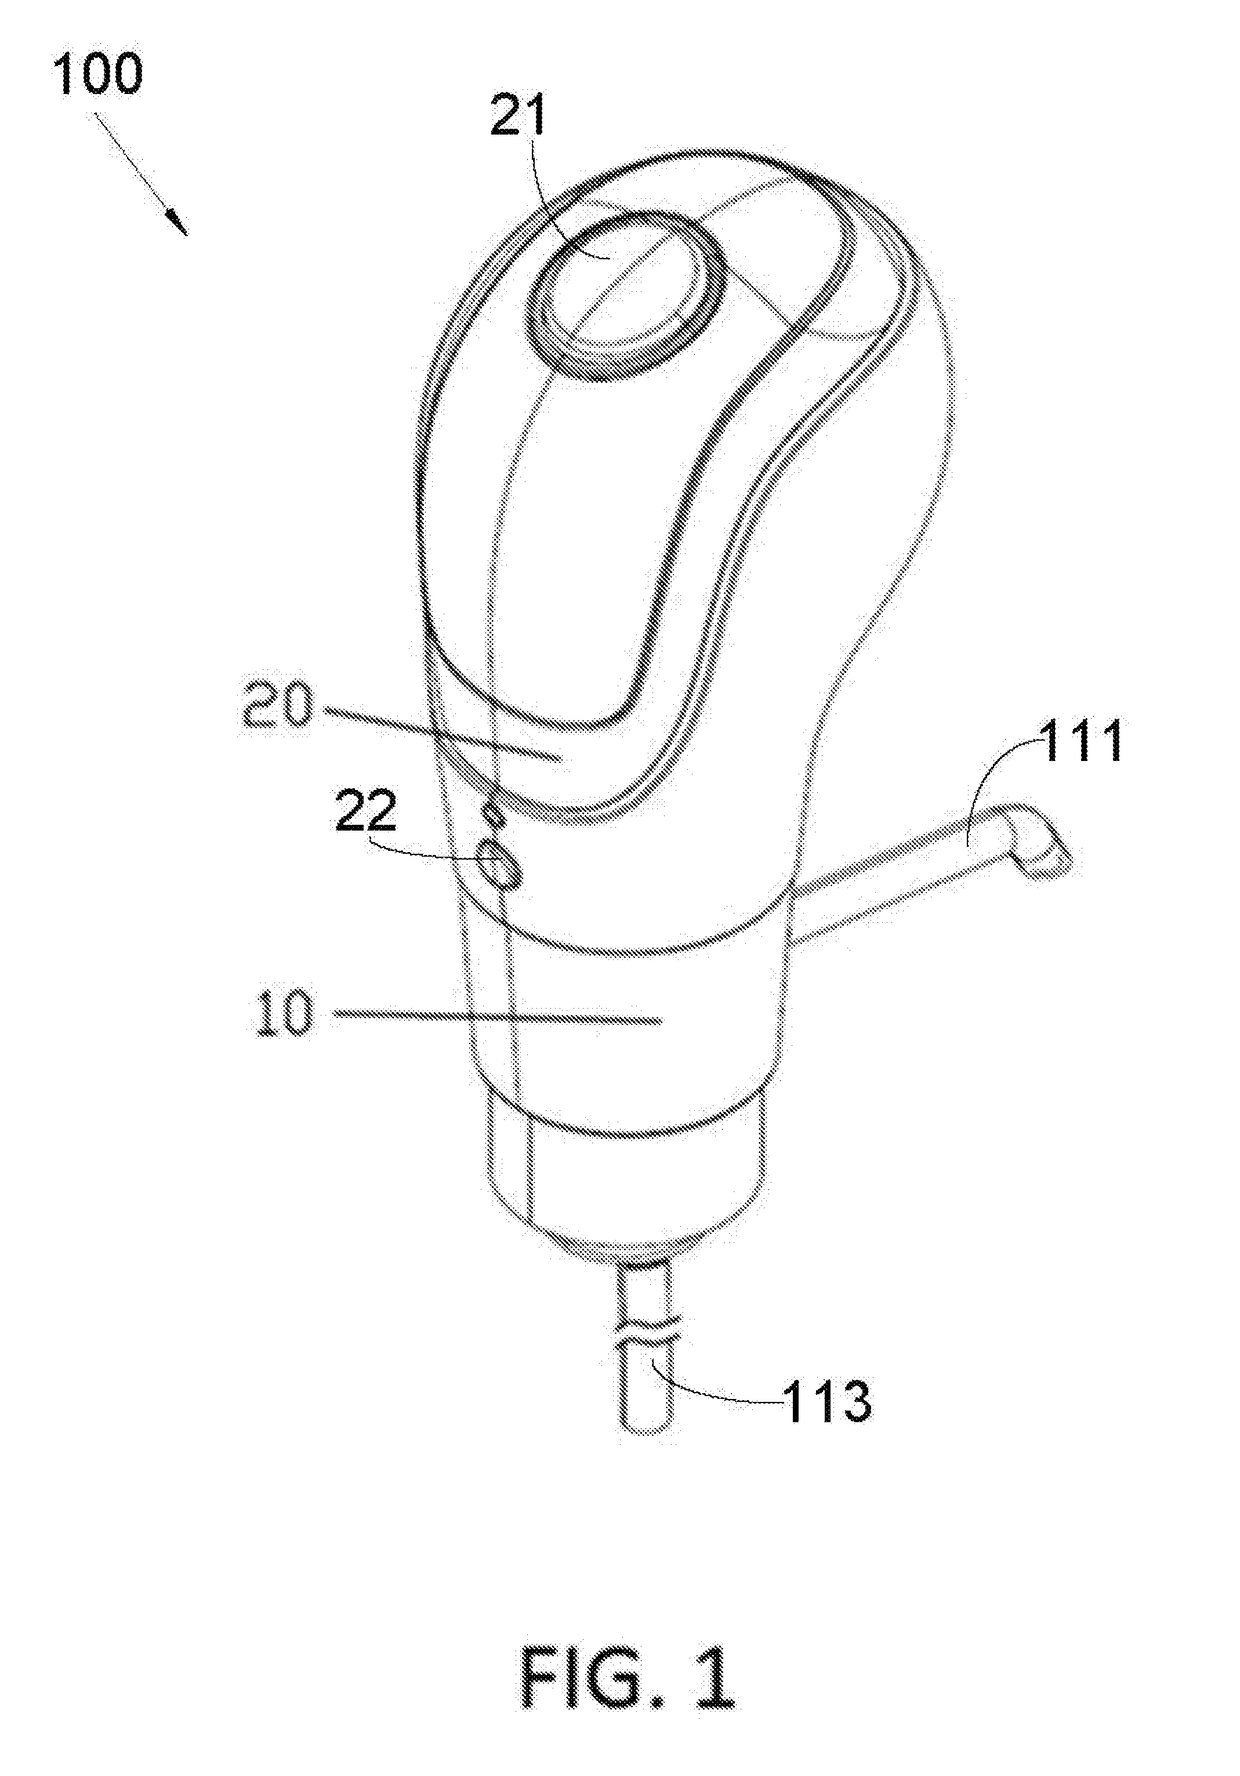 Pressurized decanting device